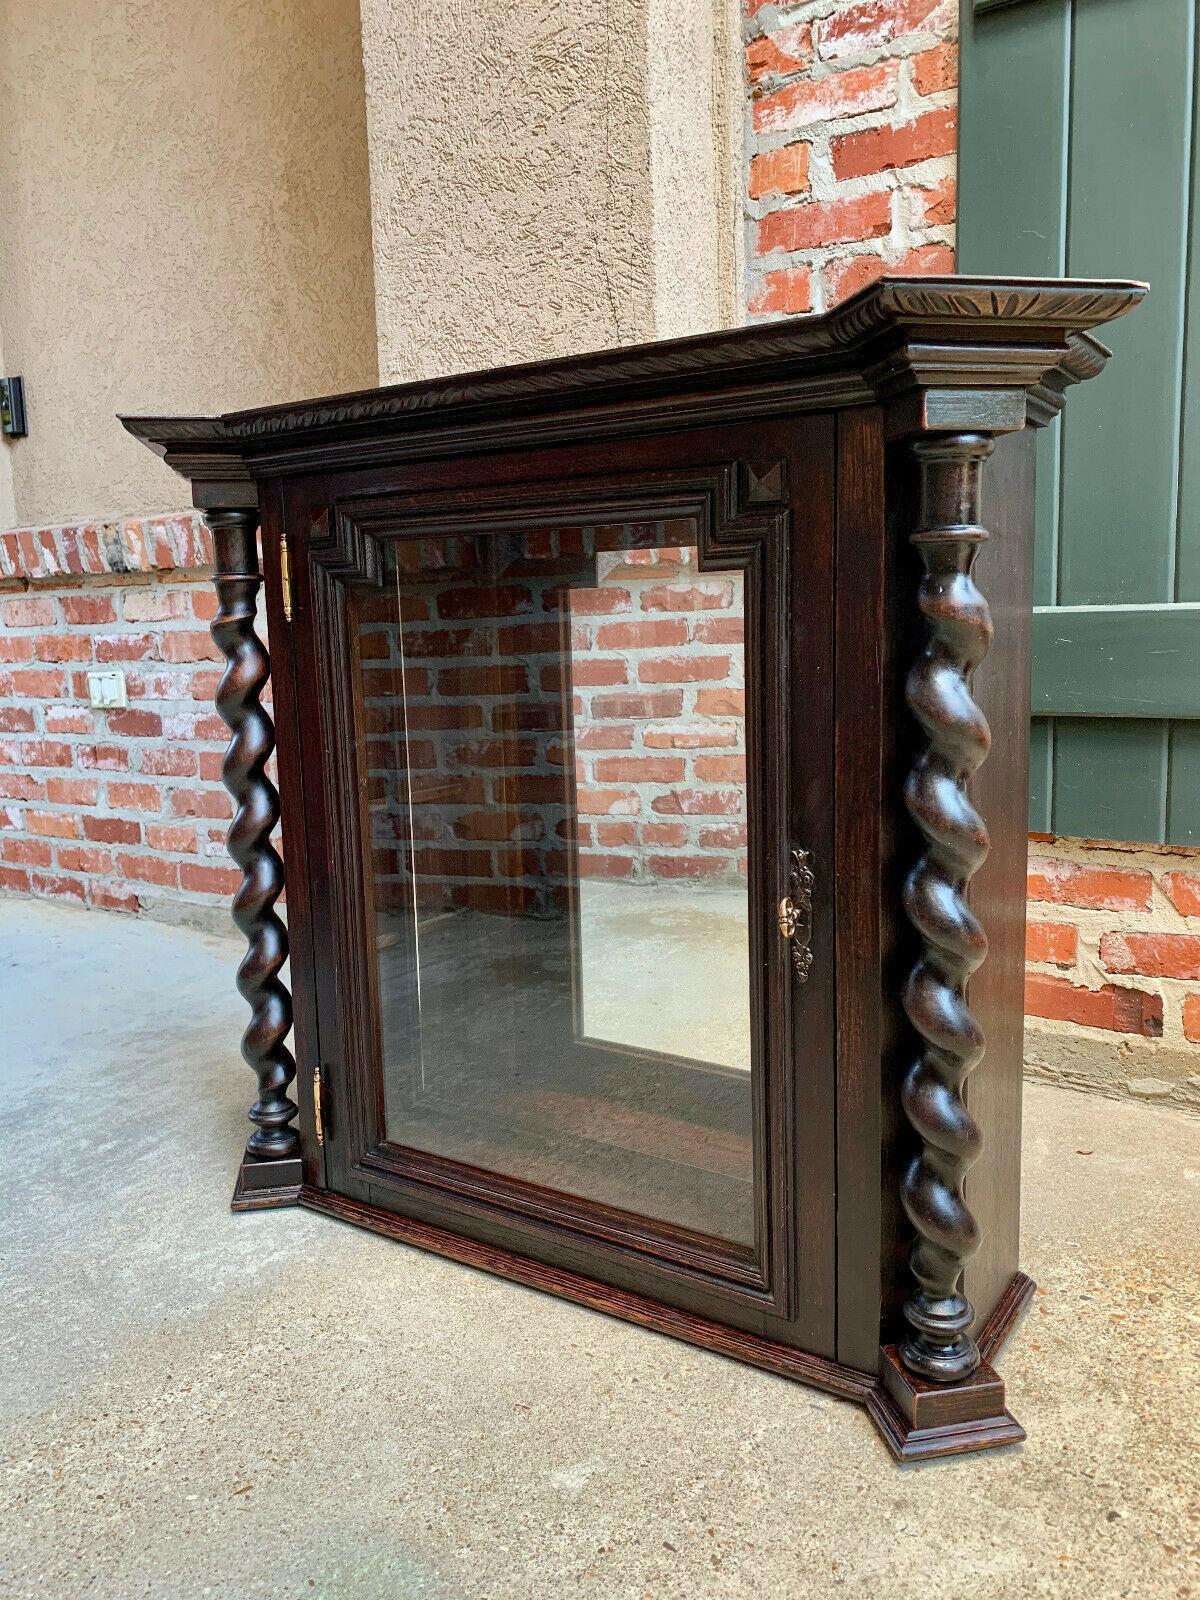 ~Direct from England~
A beautiful antique English wall cabinet or vitrine, large in size and unique in style!

Stepped out upper crown has carved beveled edges on all three sides, above the full length barley twist columns and the framed glass